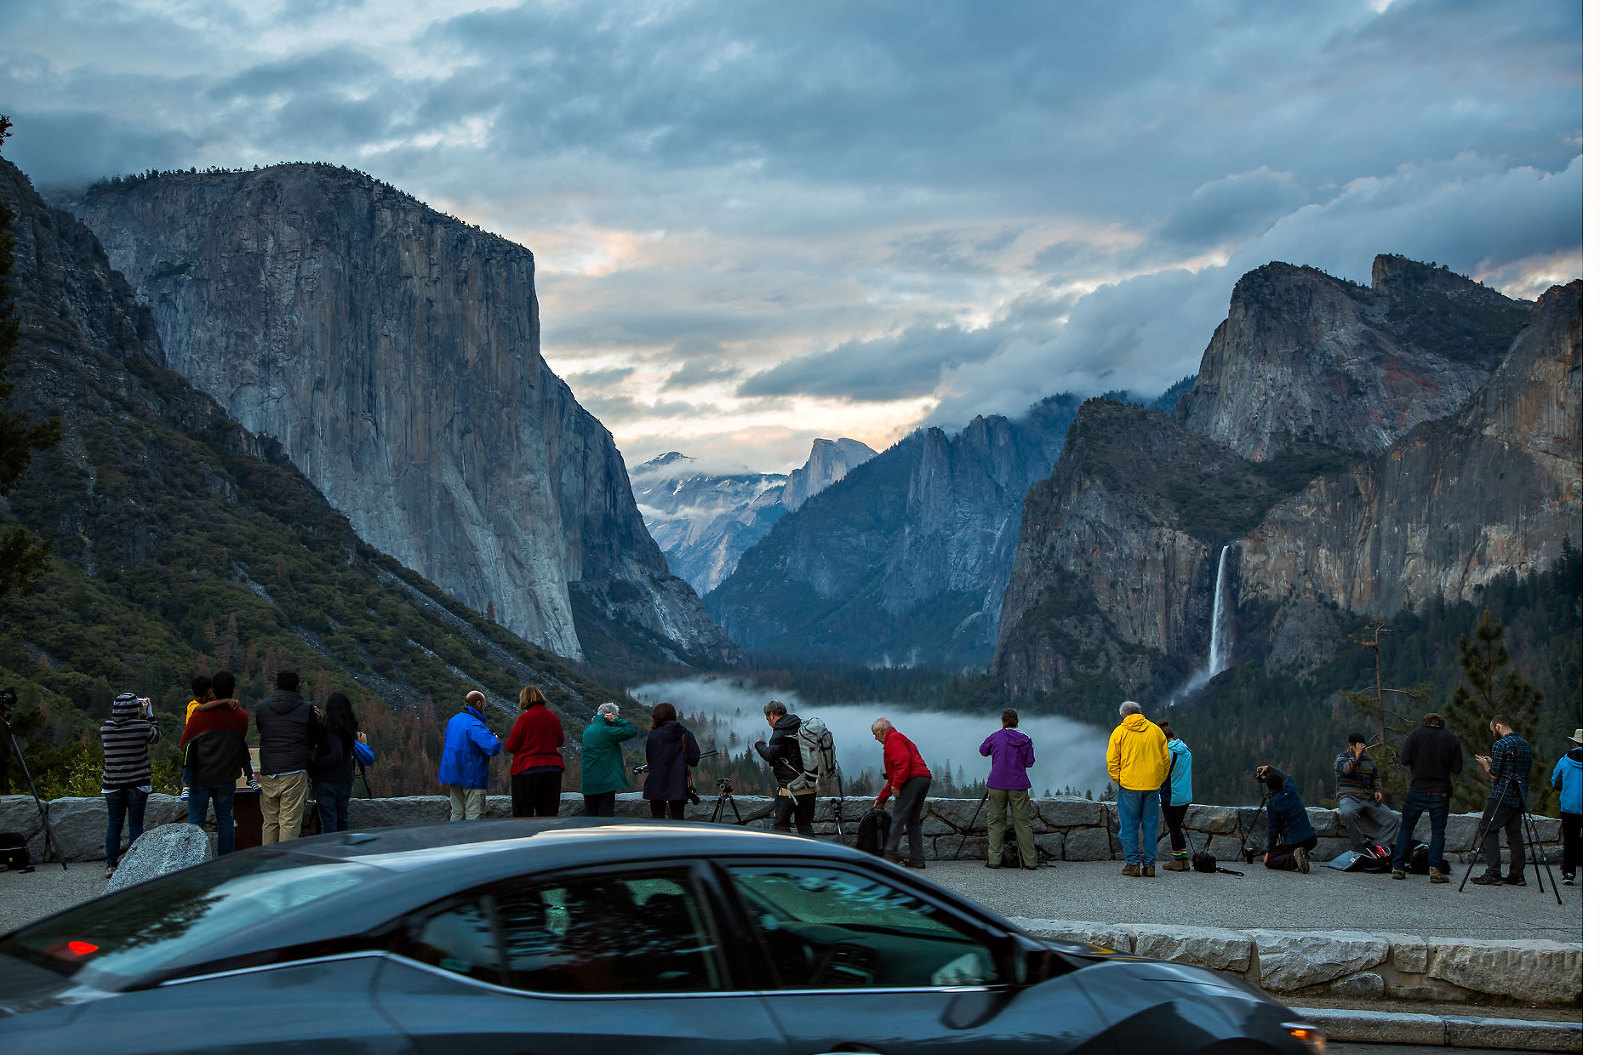 Crowd of people and car at Tunnel View.